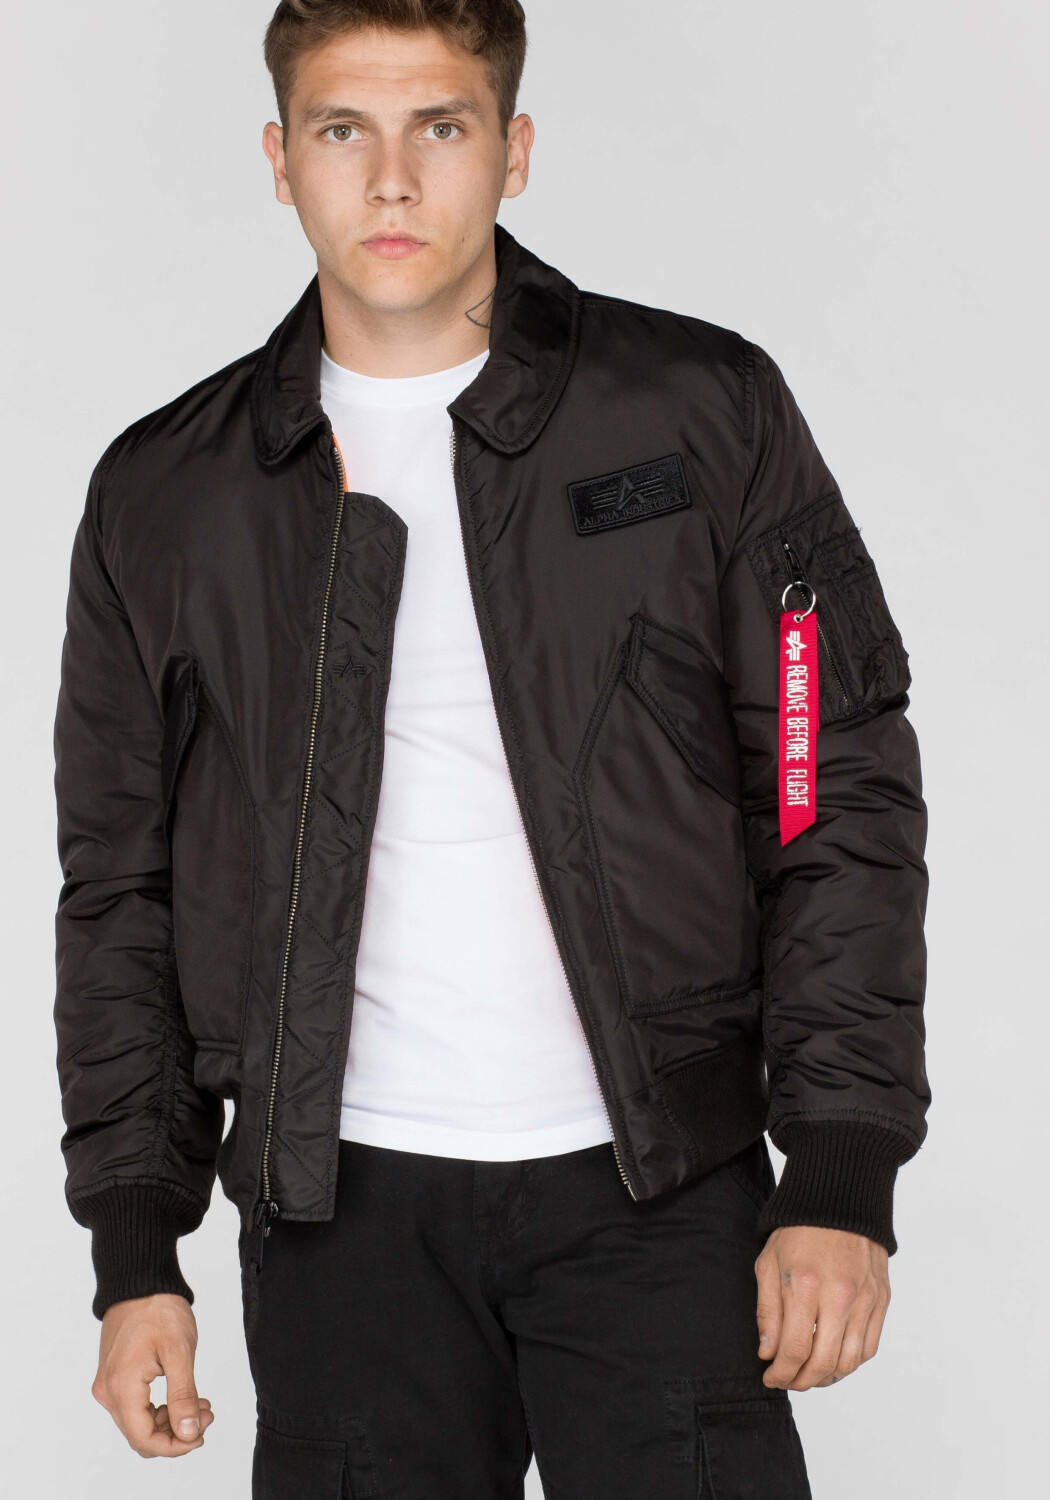 Buy Alpha Industries CWU 45 black from £125.99 (Today) – Best Deals on ...